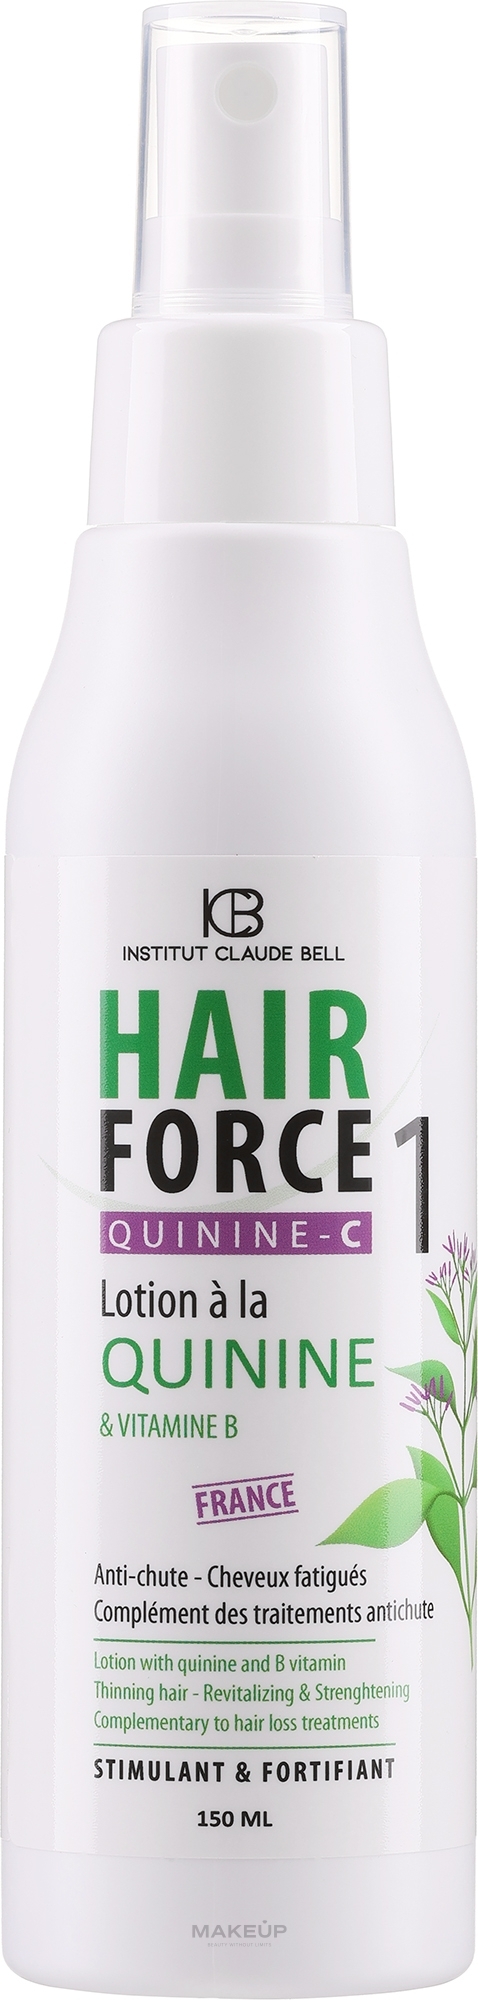 Quinine C Anti-Hair Loss Lotion - Institut Claude Bell Hair Force One Quinine C Lotion — photo 150 ml